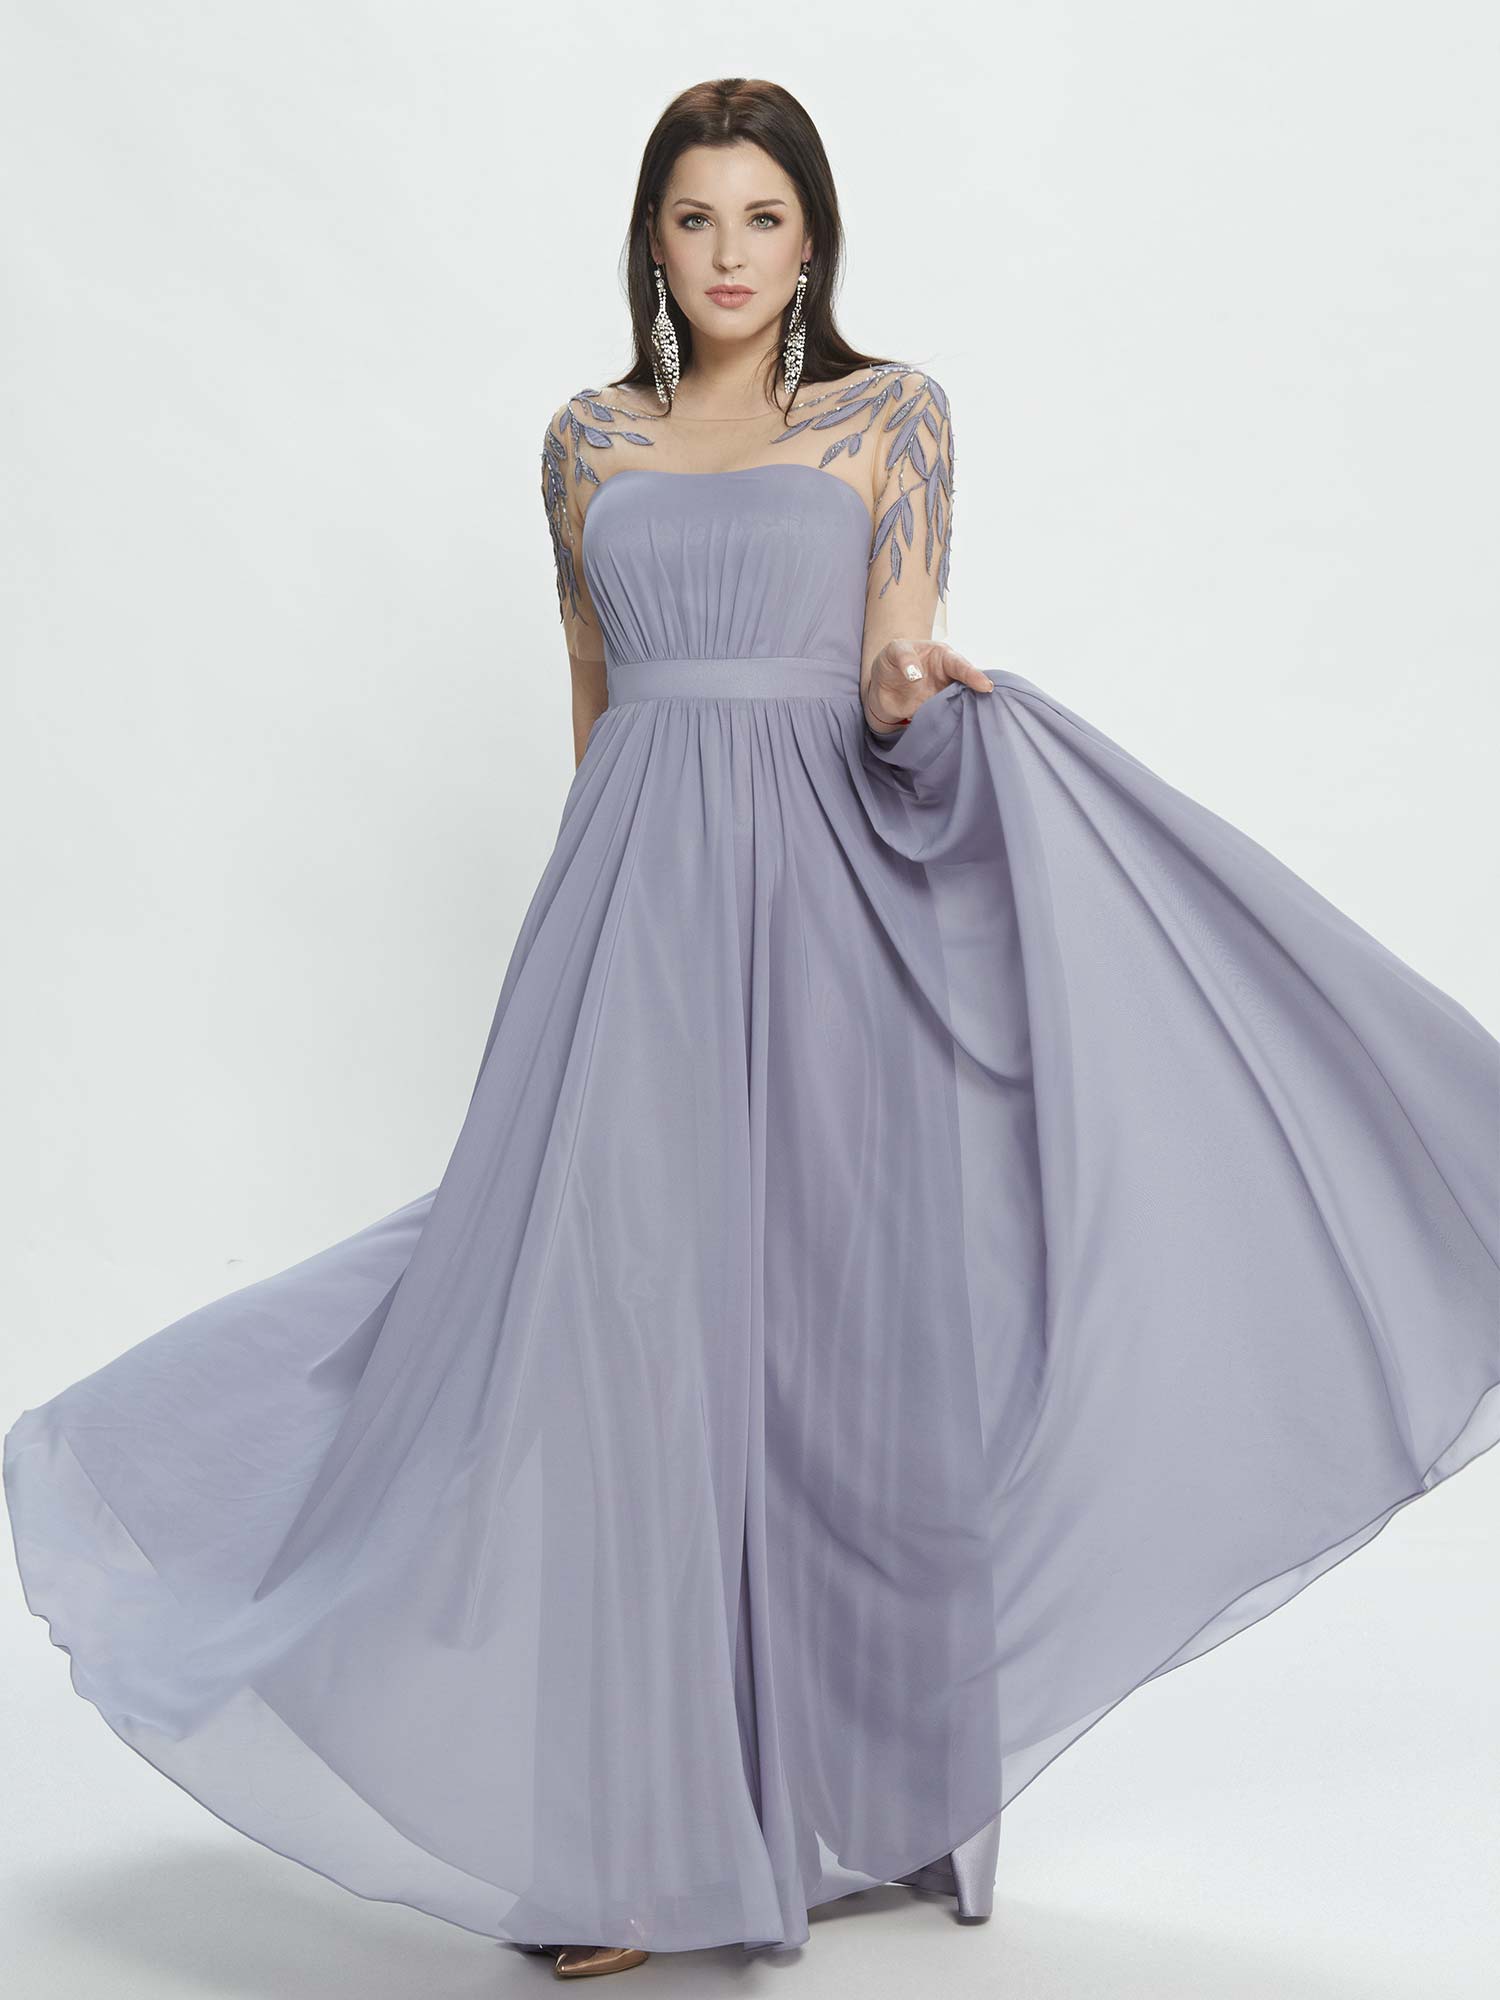 A-line evening dress with embroidered sleeves and illusion back